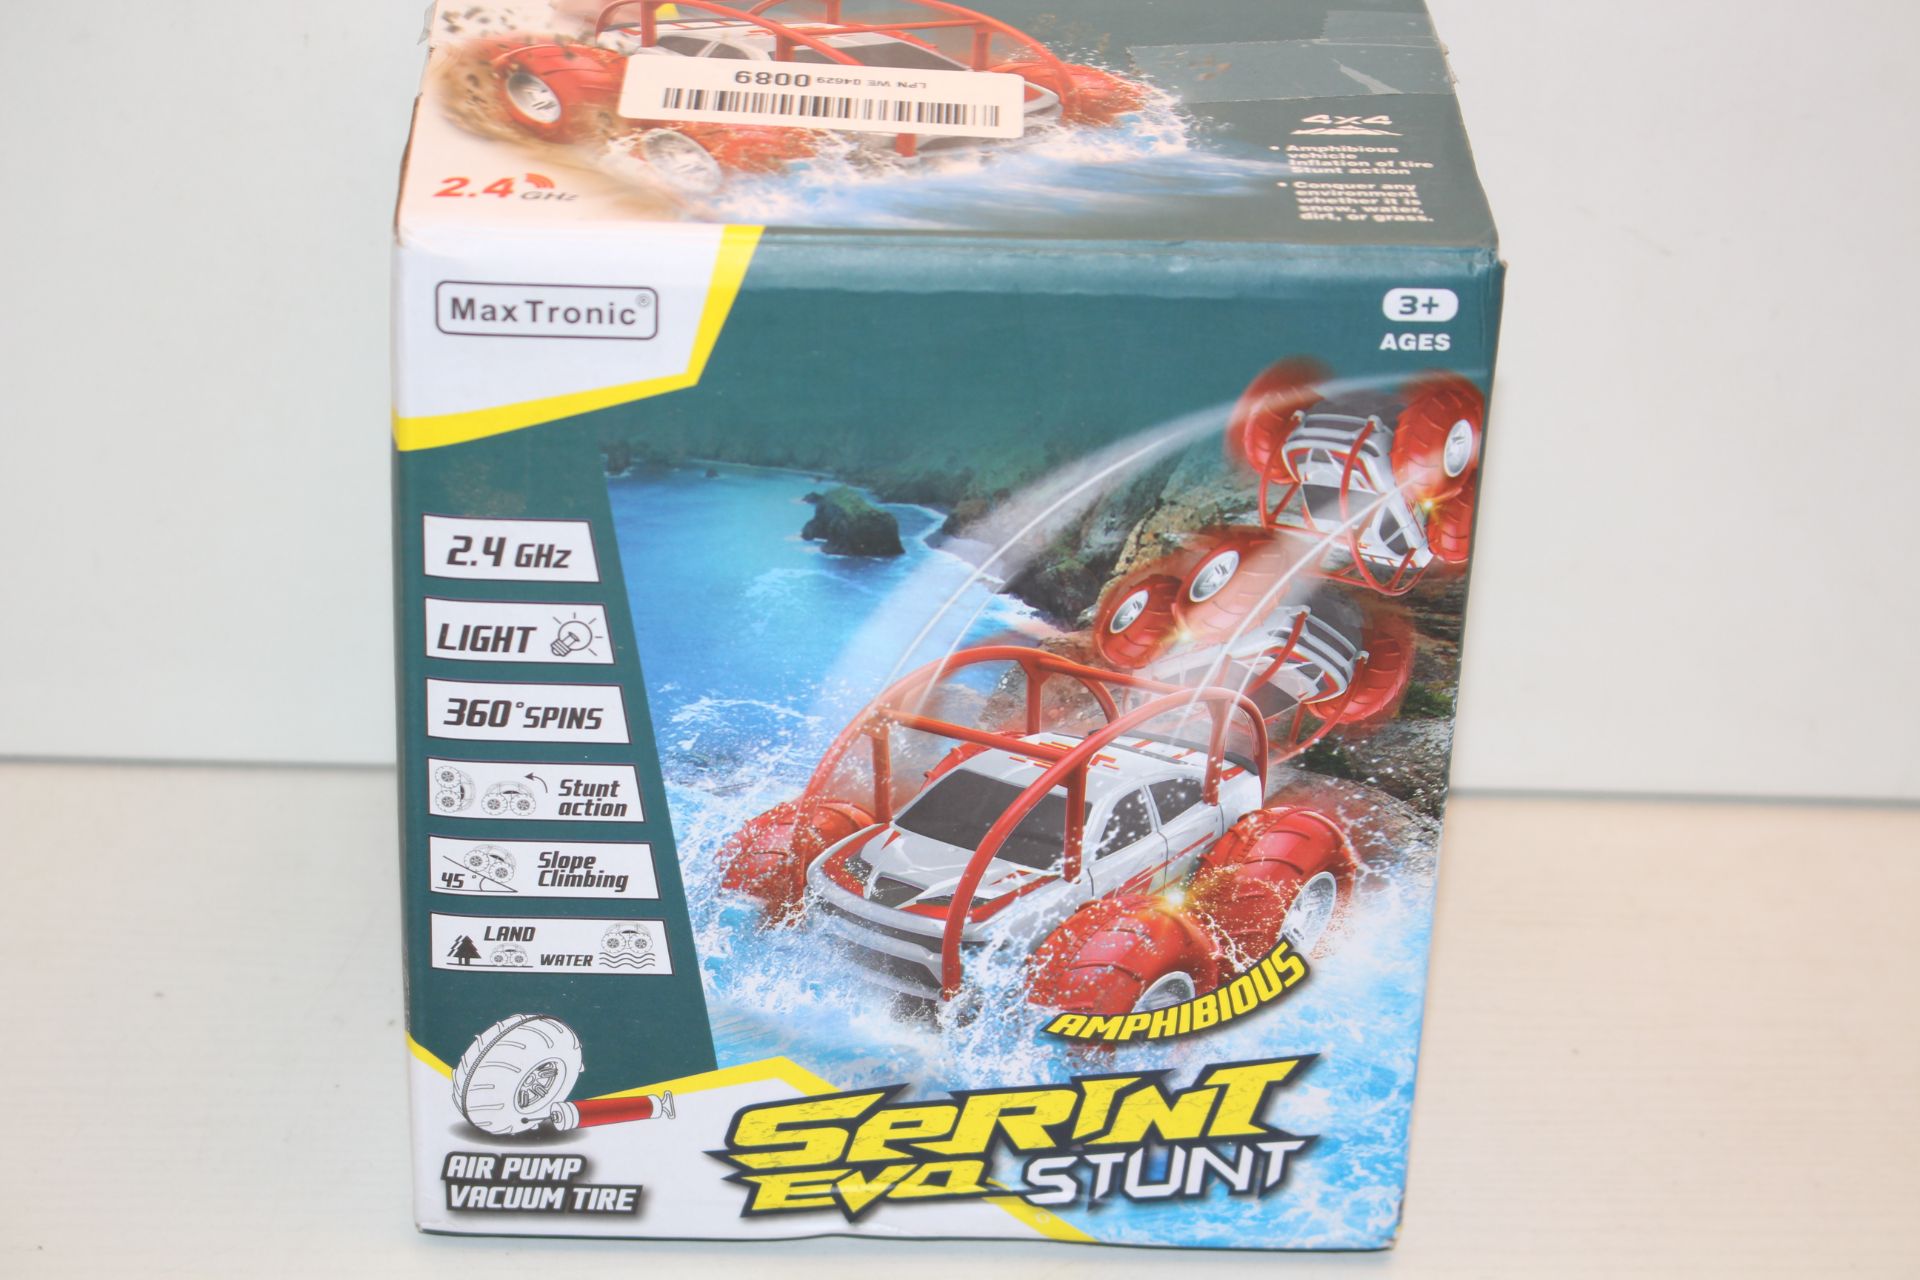 BOXED AMPHIBIOUS SPRINT EVO STUNTCondition ReportAppraisal Available on Request- All Items are